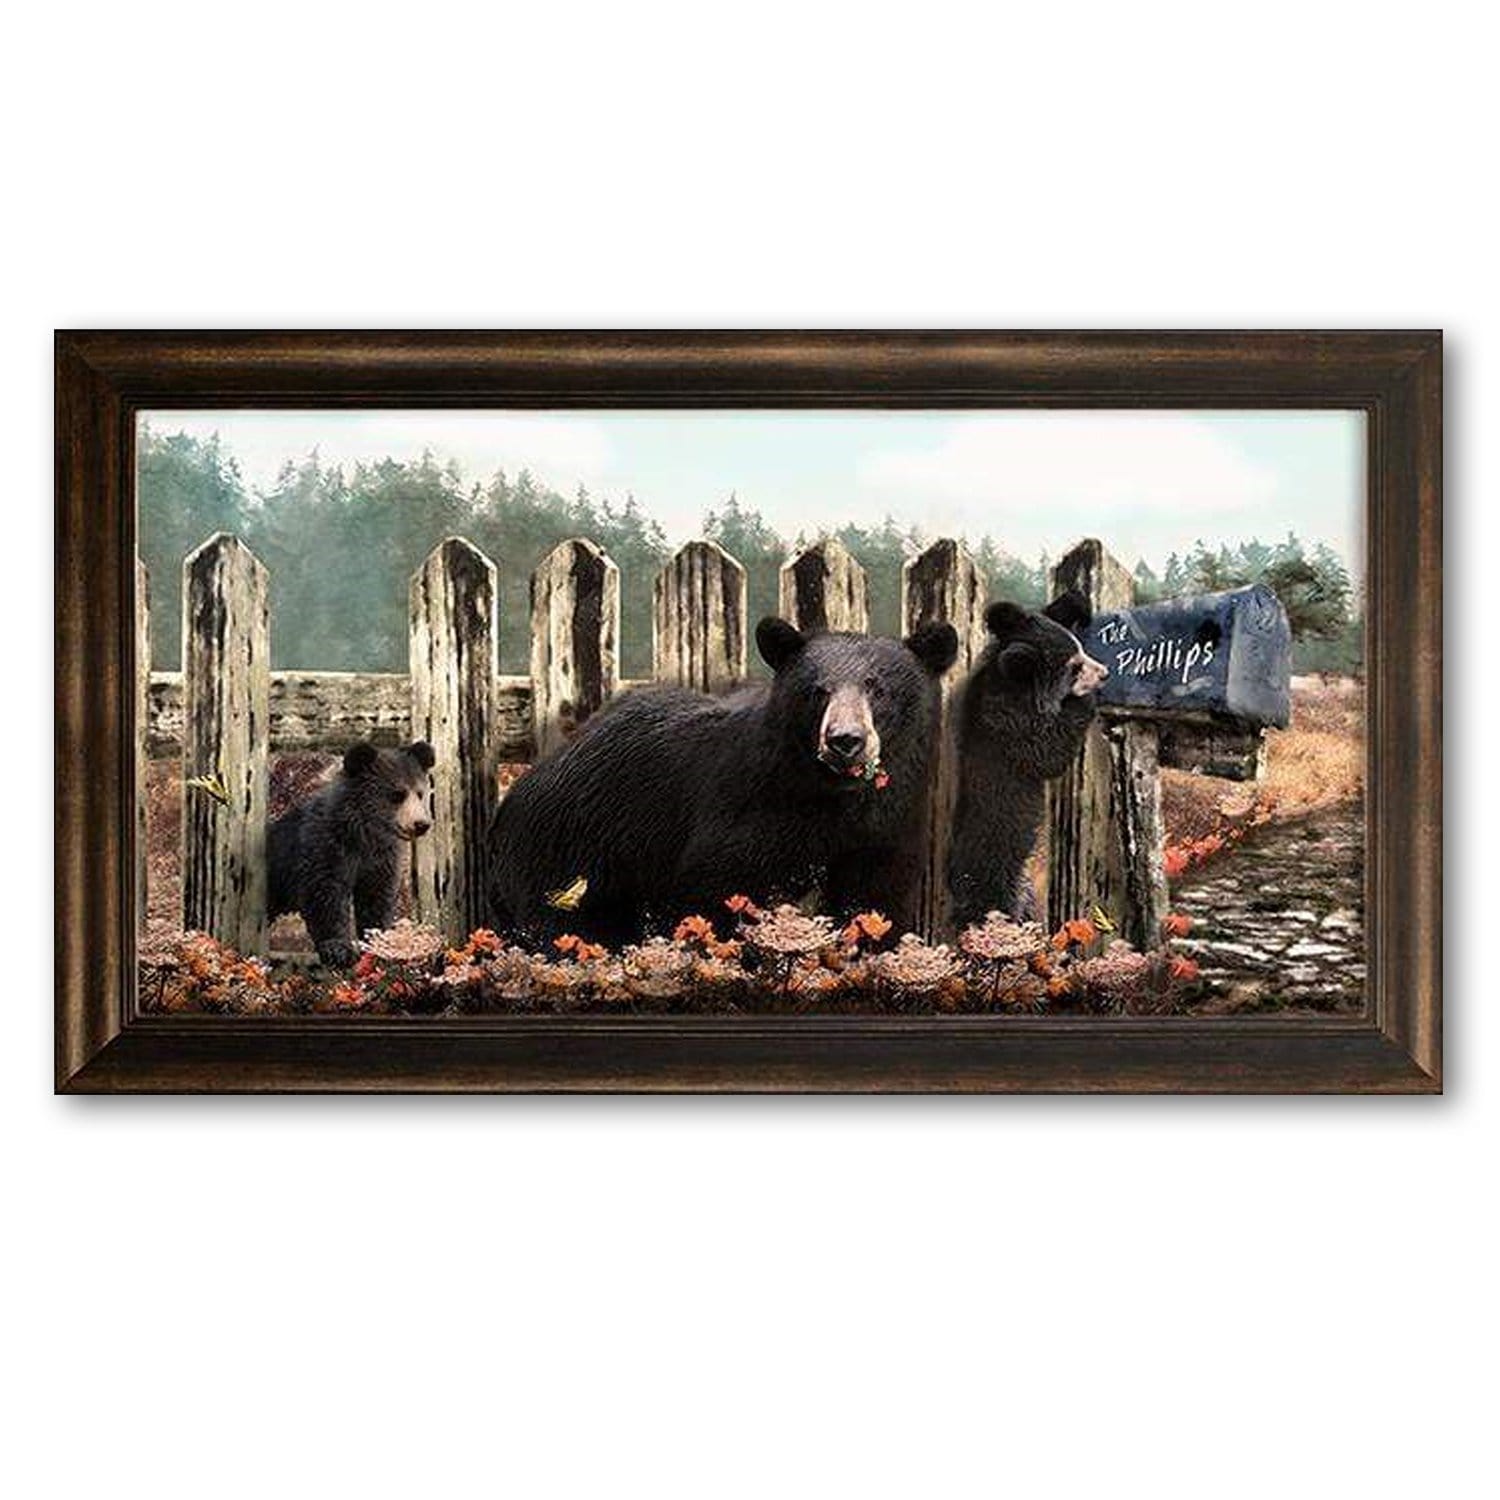 Black Bear Family framed canvas art from Personal Prints